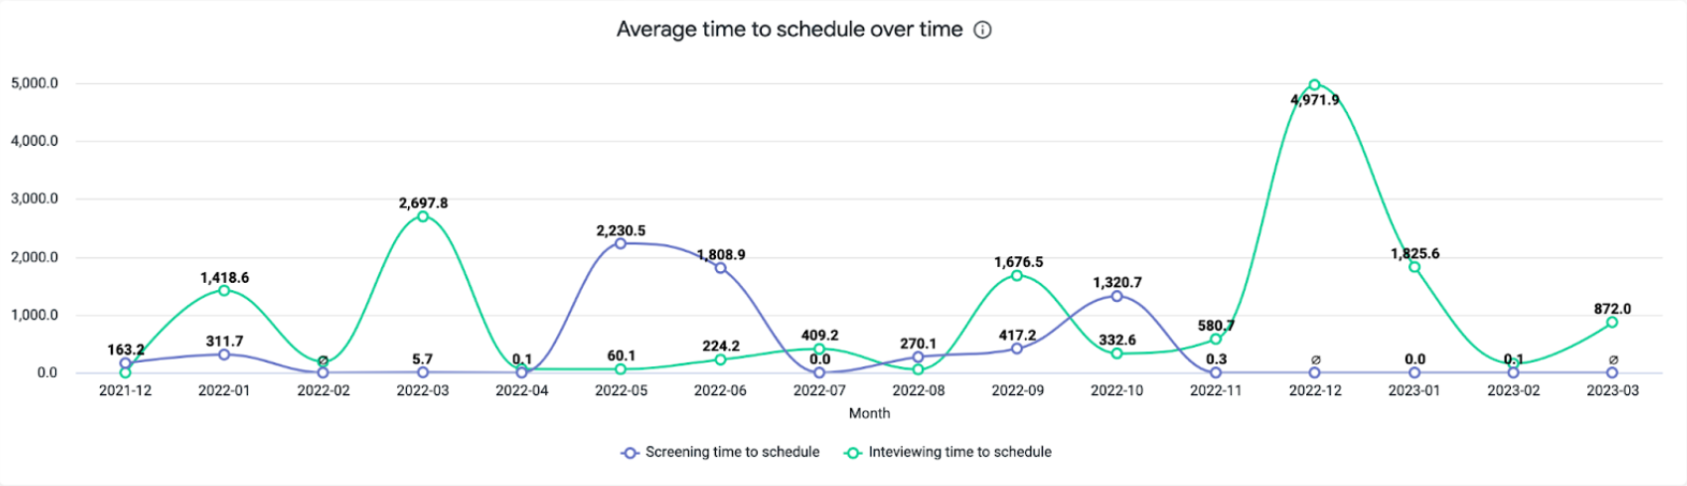 Average time to schedule over time chart.